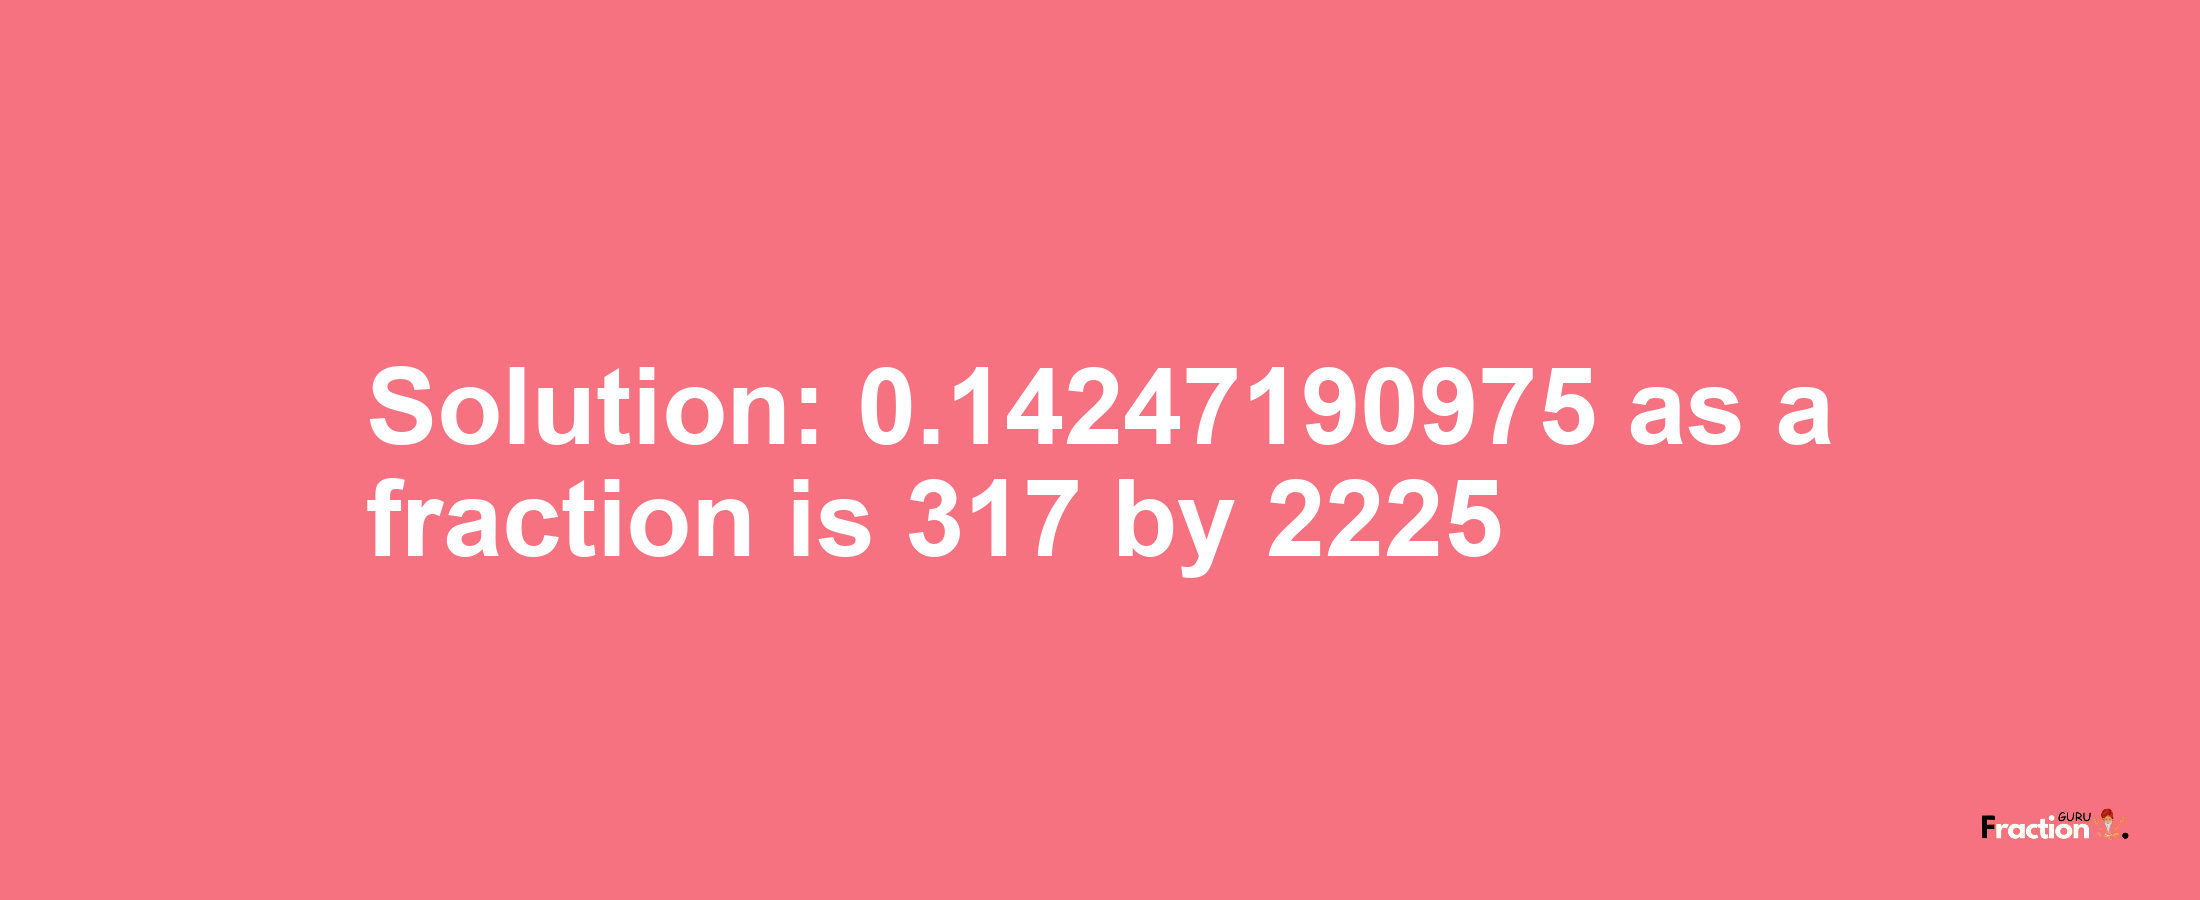 Solution:0.14247190975 as a fraction is 317/2225